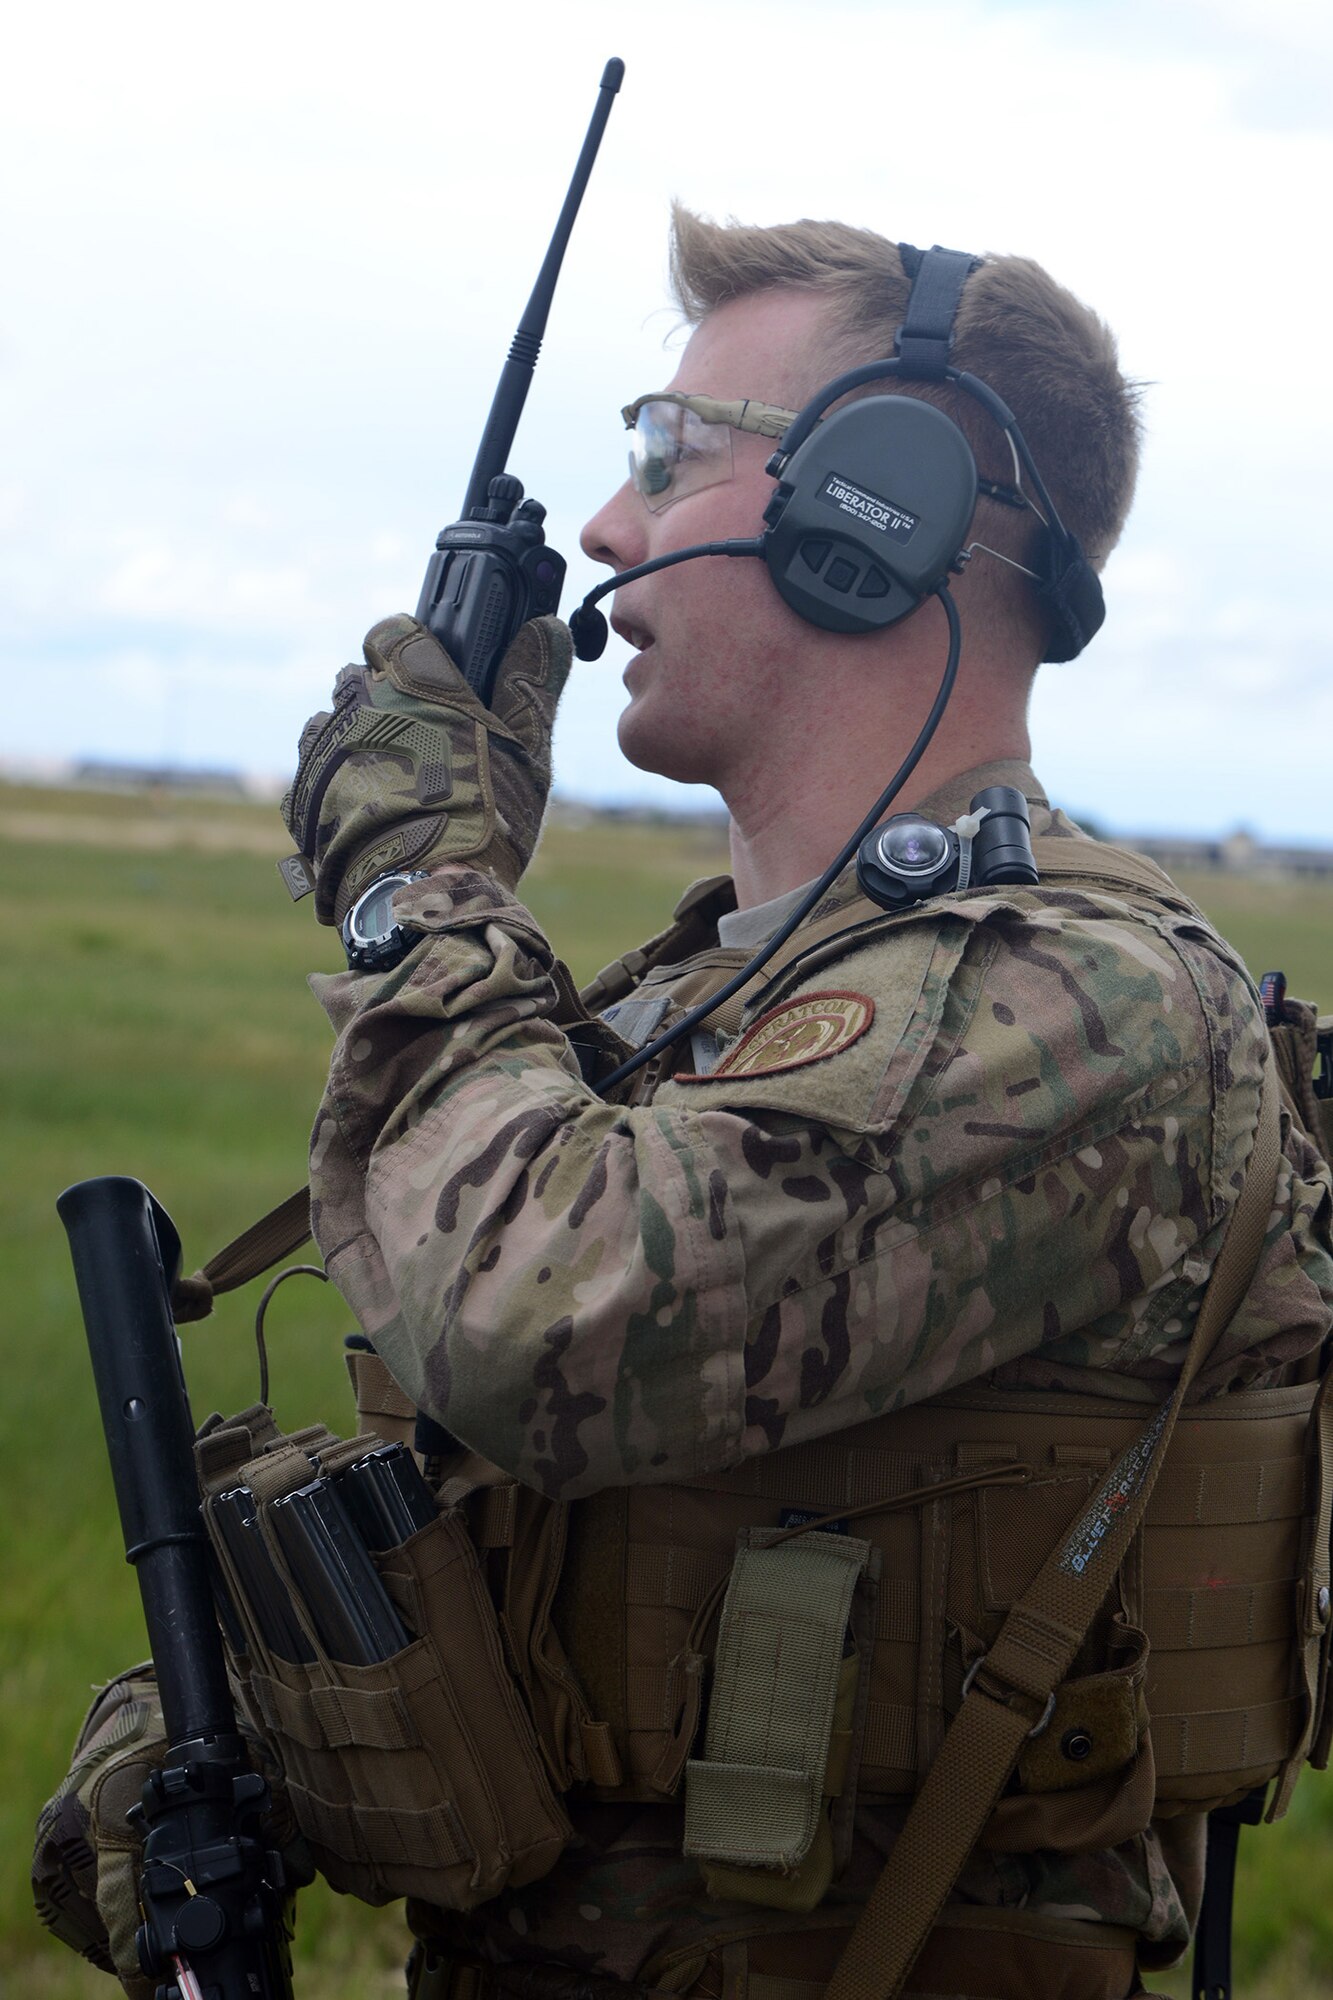 Senior Airman William Lamb, 741st Missile Security Forces Squadron Tactical Response Force member, talks into a land mobile radio to communicate with an aircrew in an UH-1N Iriquois at a mock launch facility July 6, 2016, at Malmstrom Air Force Base, Mont. TRF maintains communication with the 40th Helicopter Squadron aircrew to update the status on the ground and to coordinate pick-up or reposition. (U.S. Air Force photo/Staff Sgt. Delia Marchick)